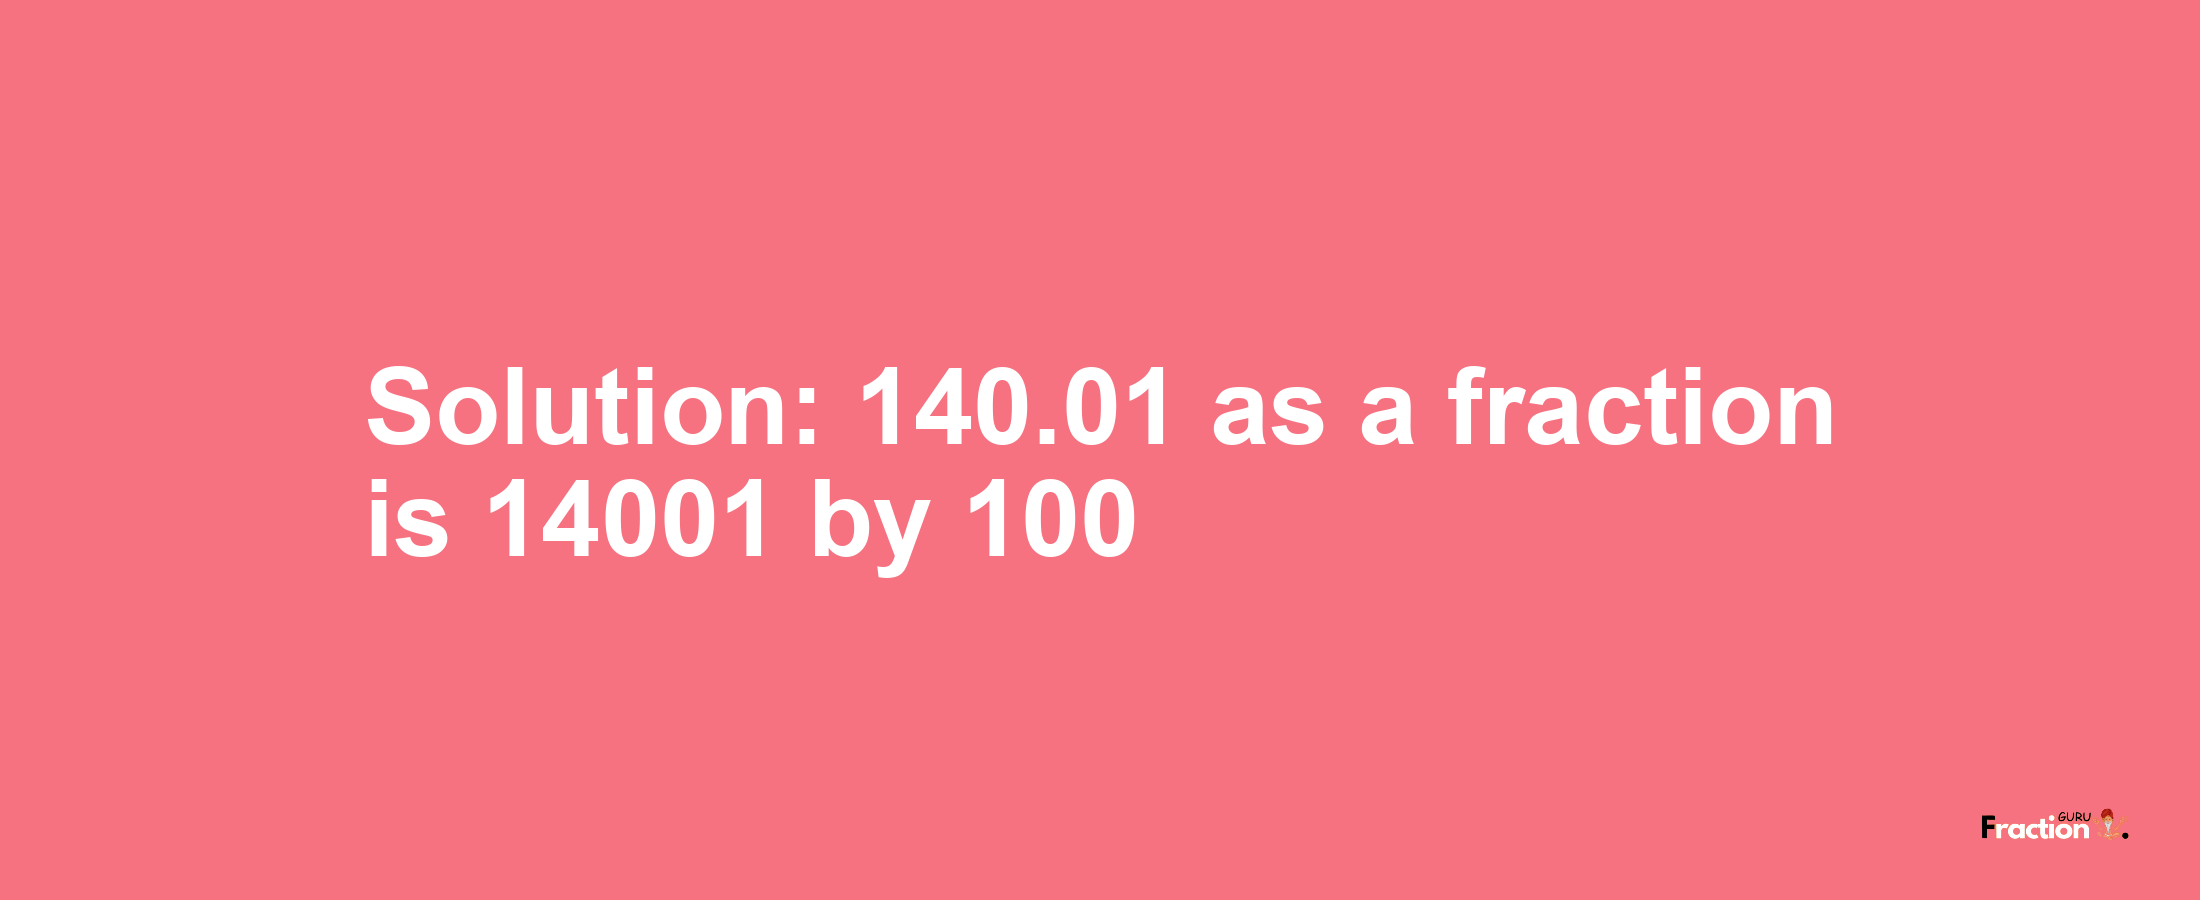 Solution:140.01 as a fraction is 14001/100